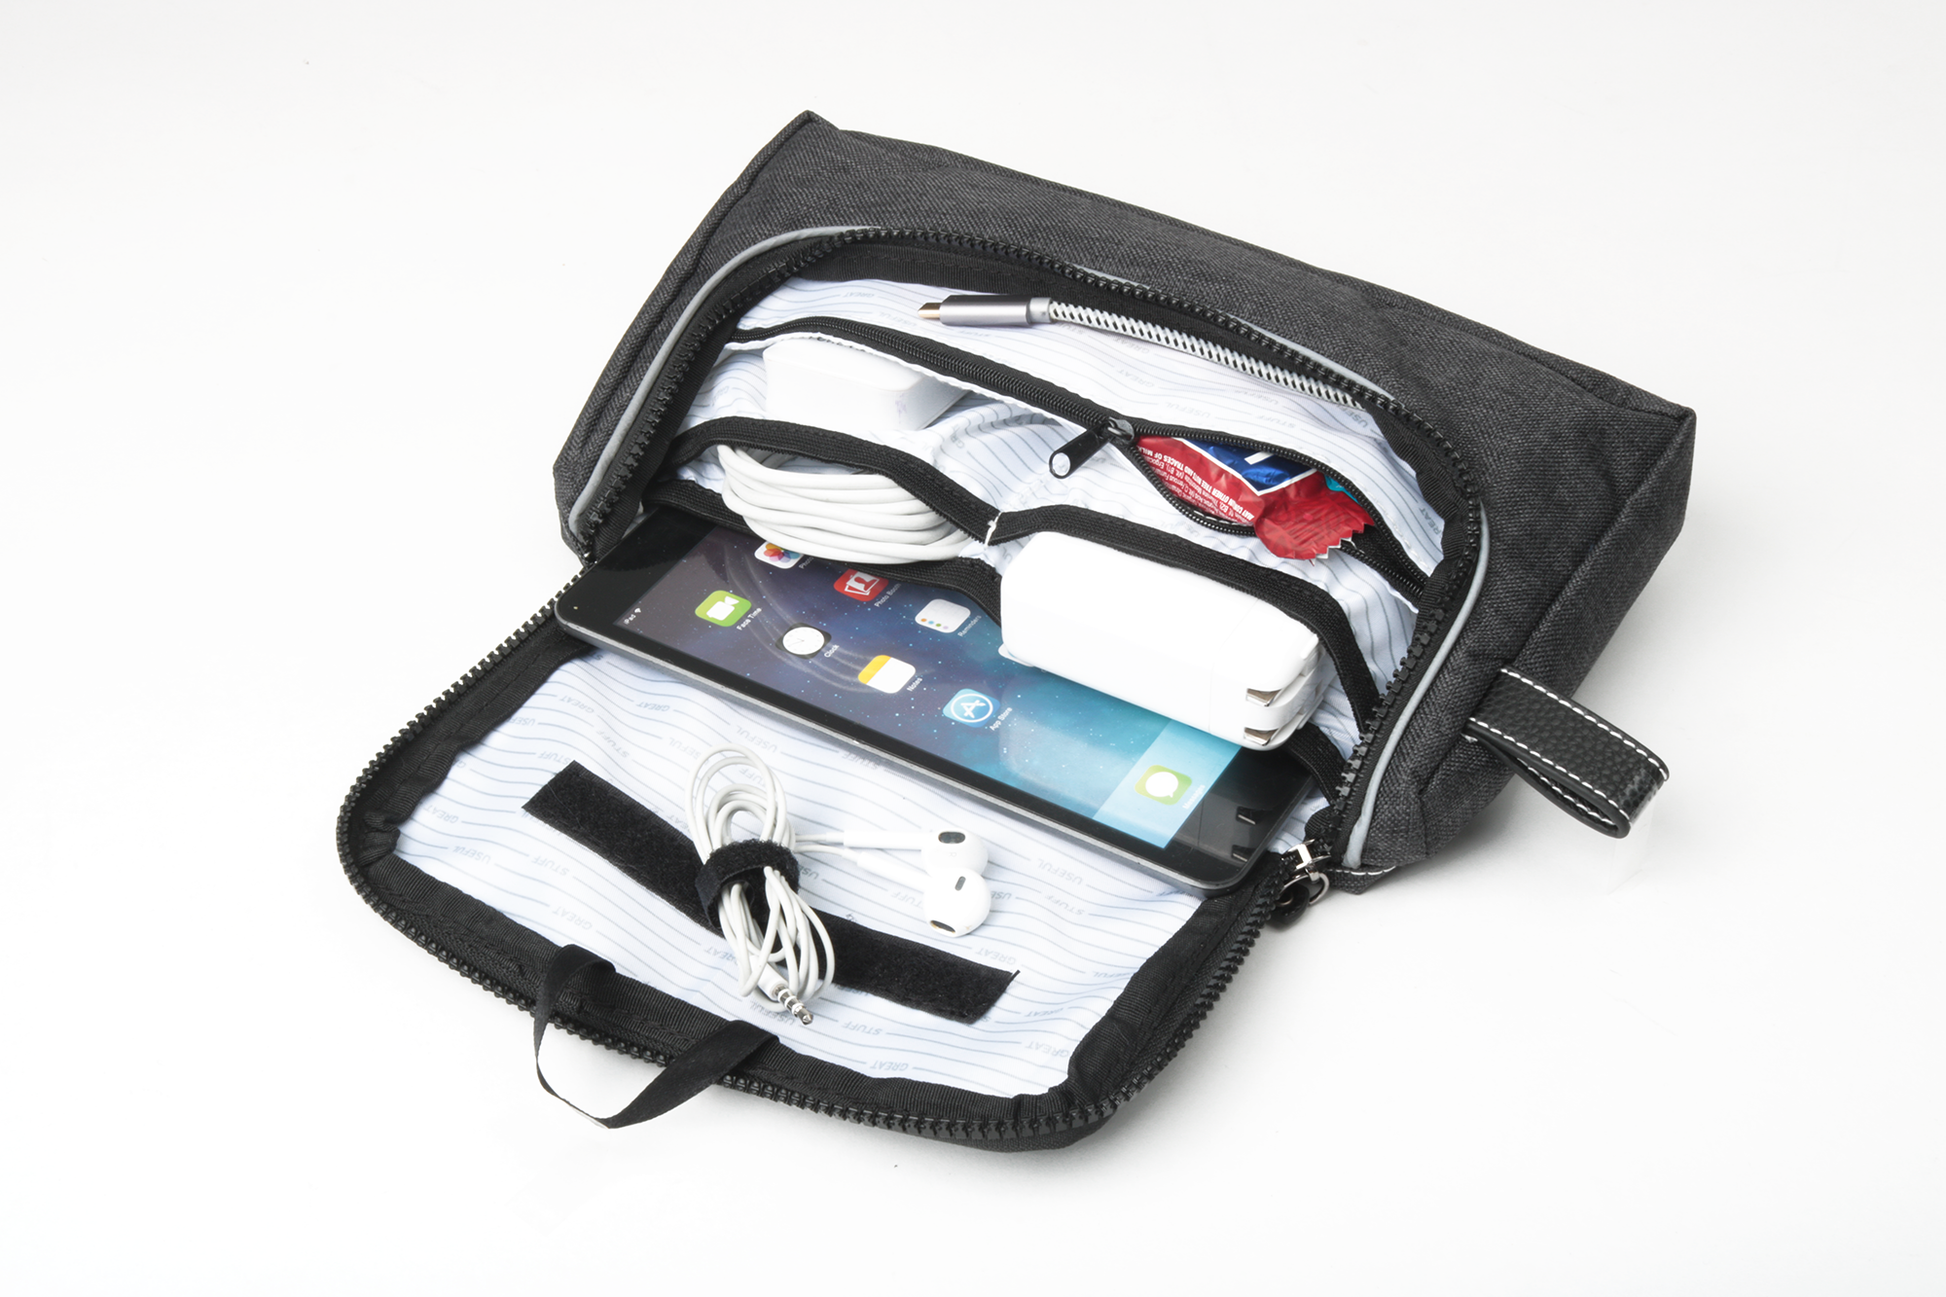 Travel Media Pouch